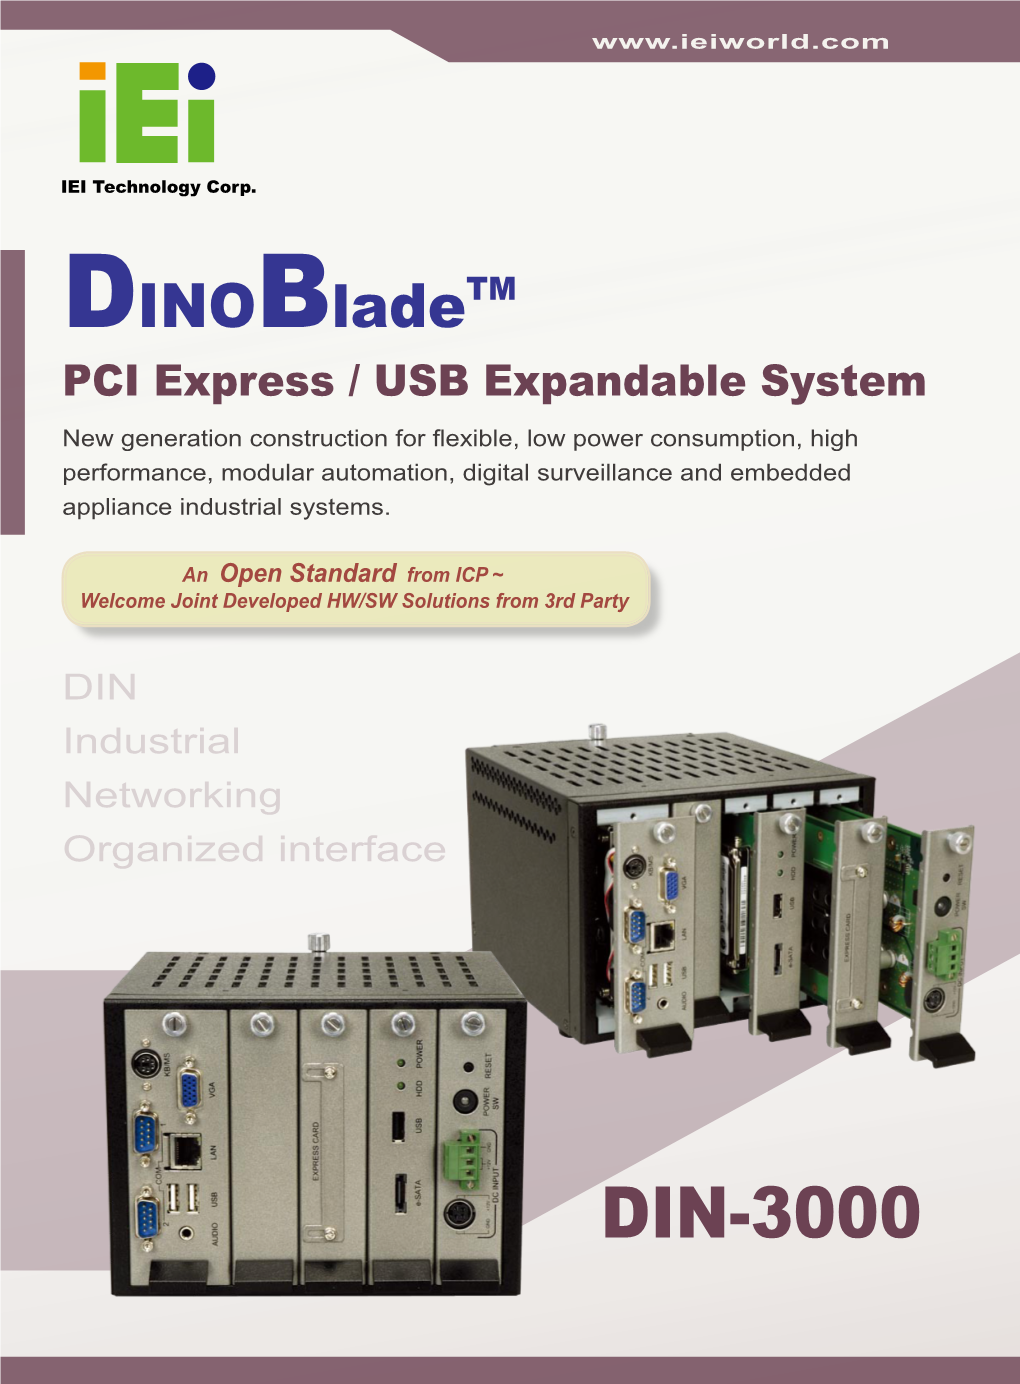 DIN-3000 DIN Industrial Networking Organized Interface